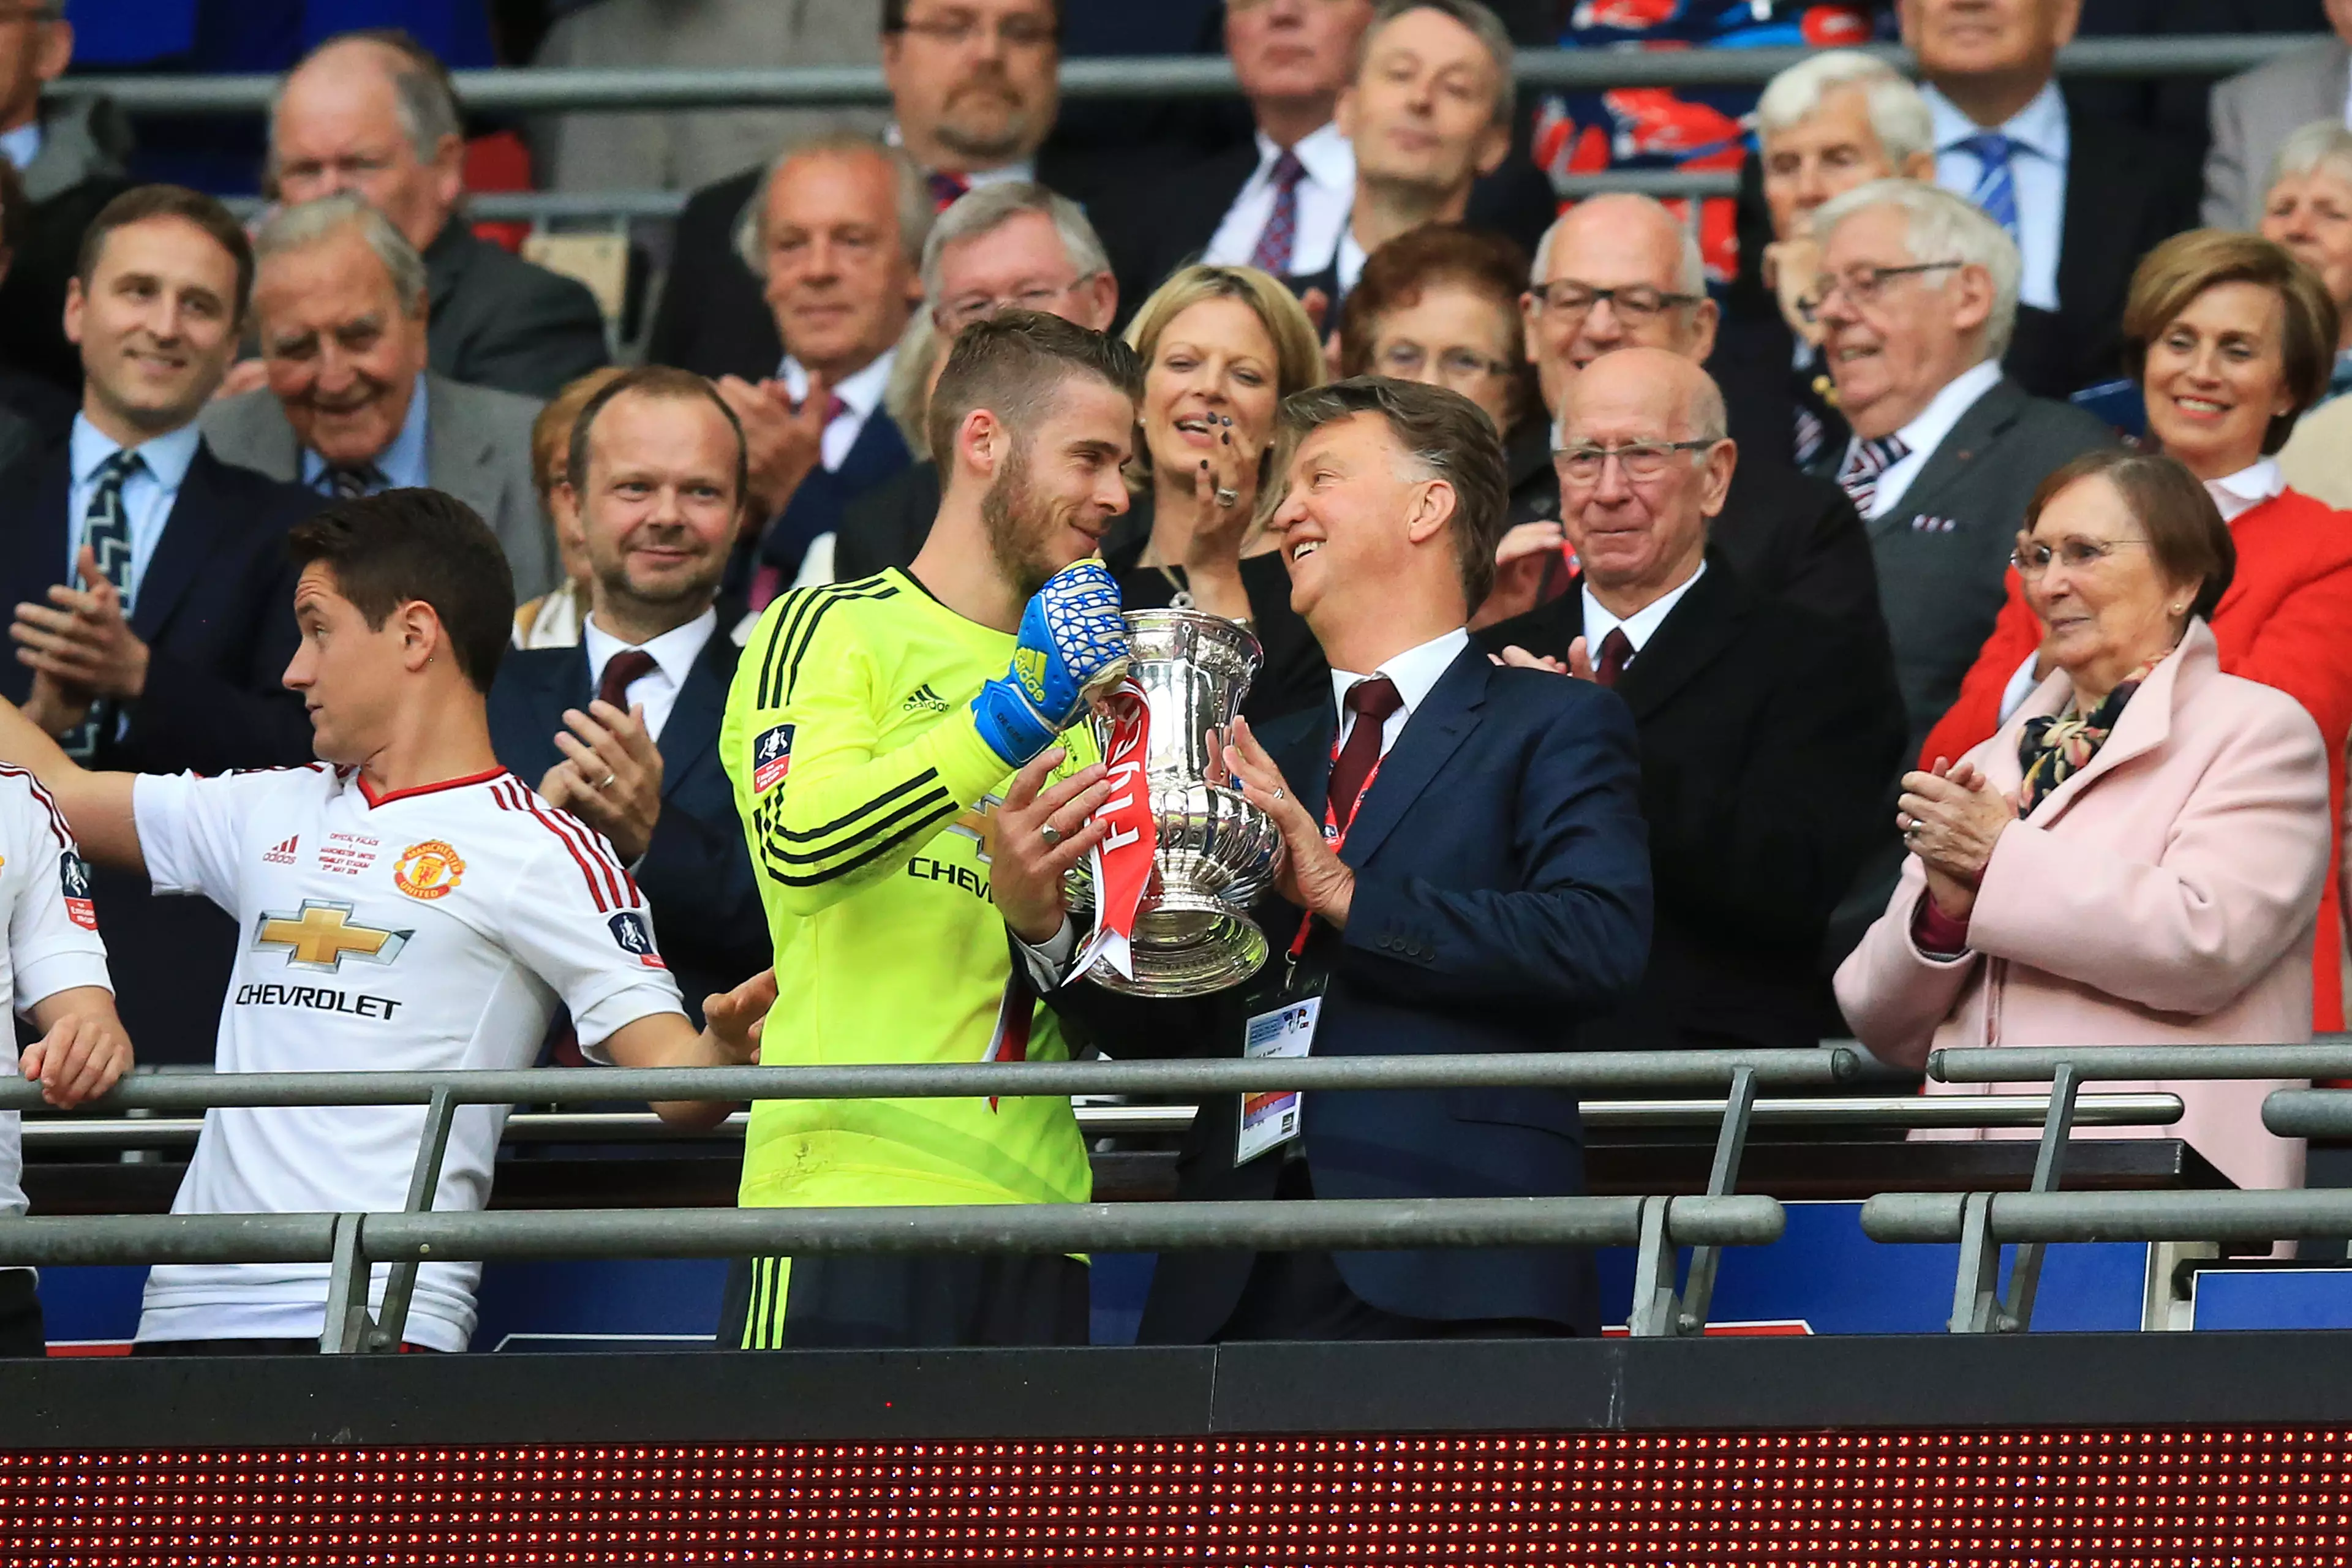 Van Gaal won the FA Cup but was soon sacked. Image: PA Images